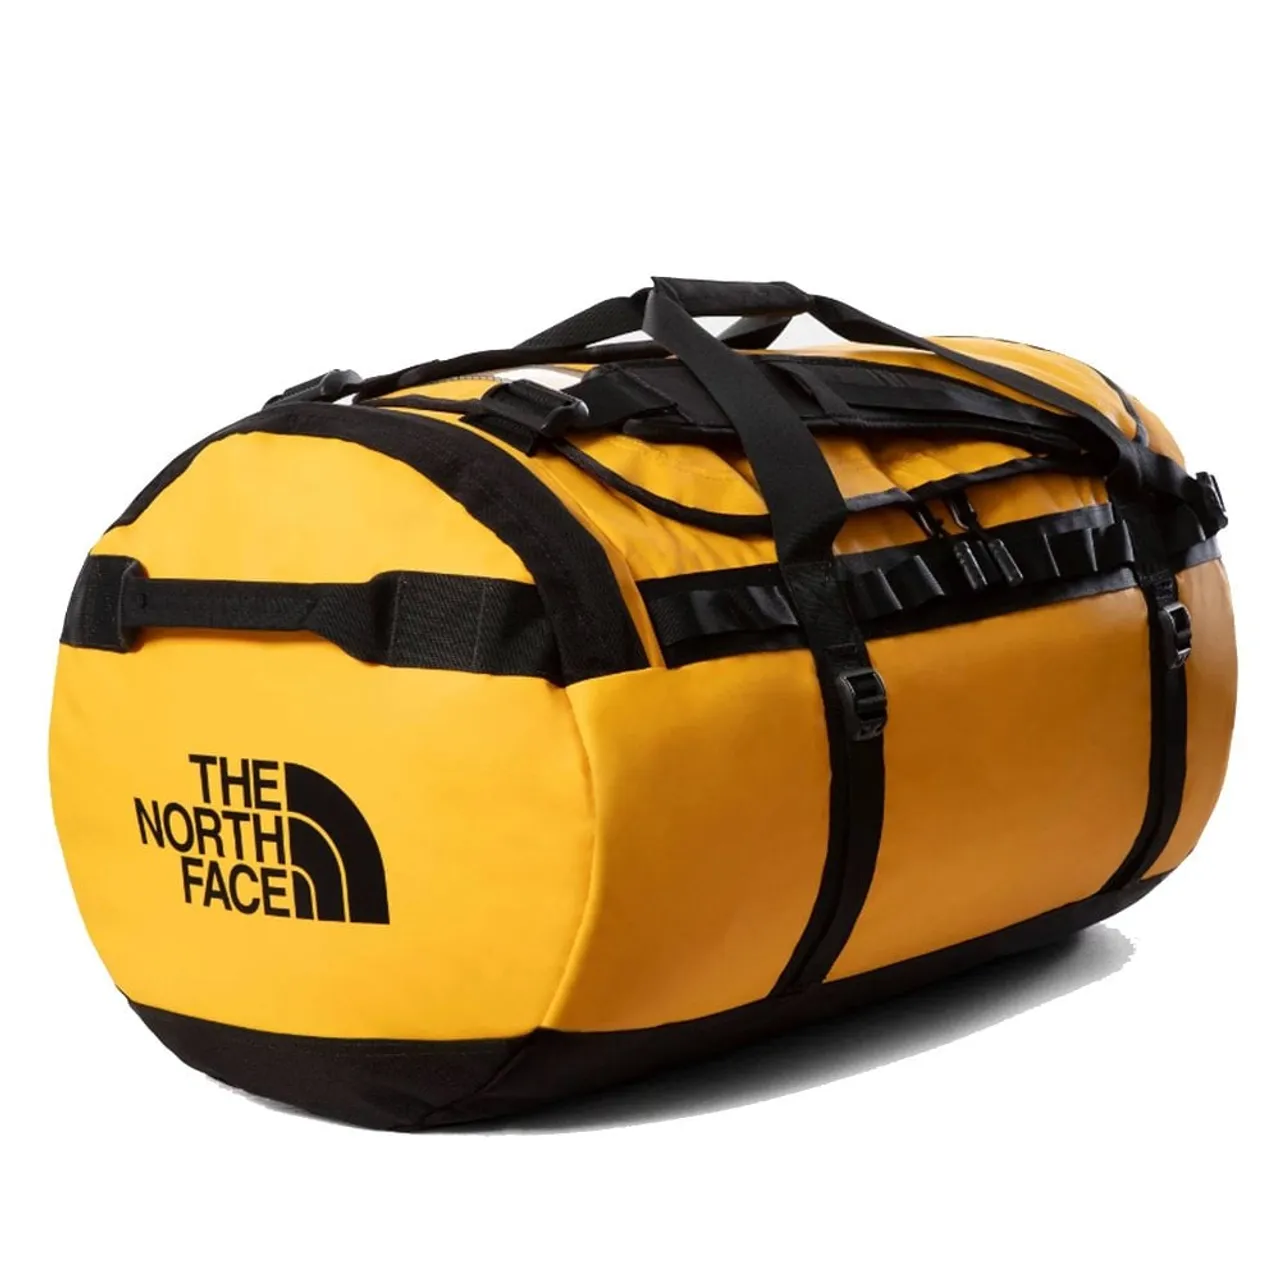 The North Face Base Camp Duffel Bag - Large: Summit Gold Colour: Summi